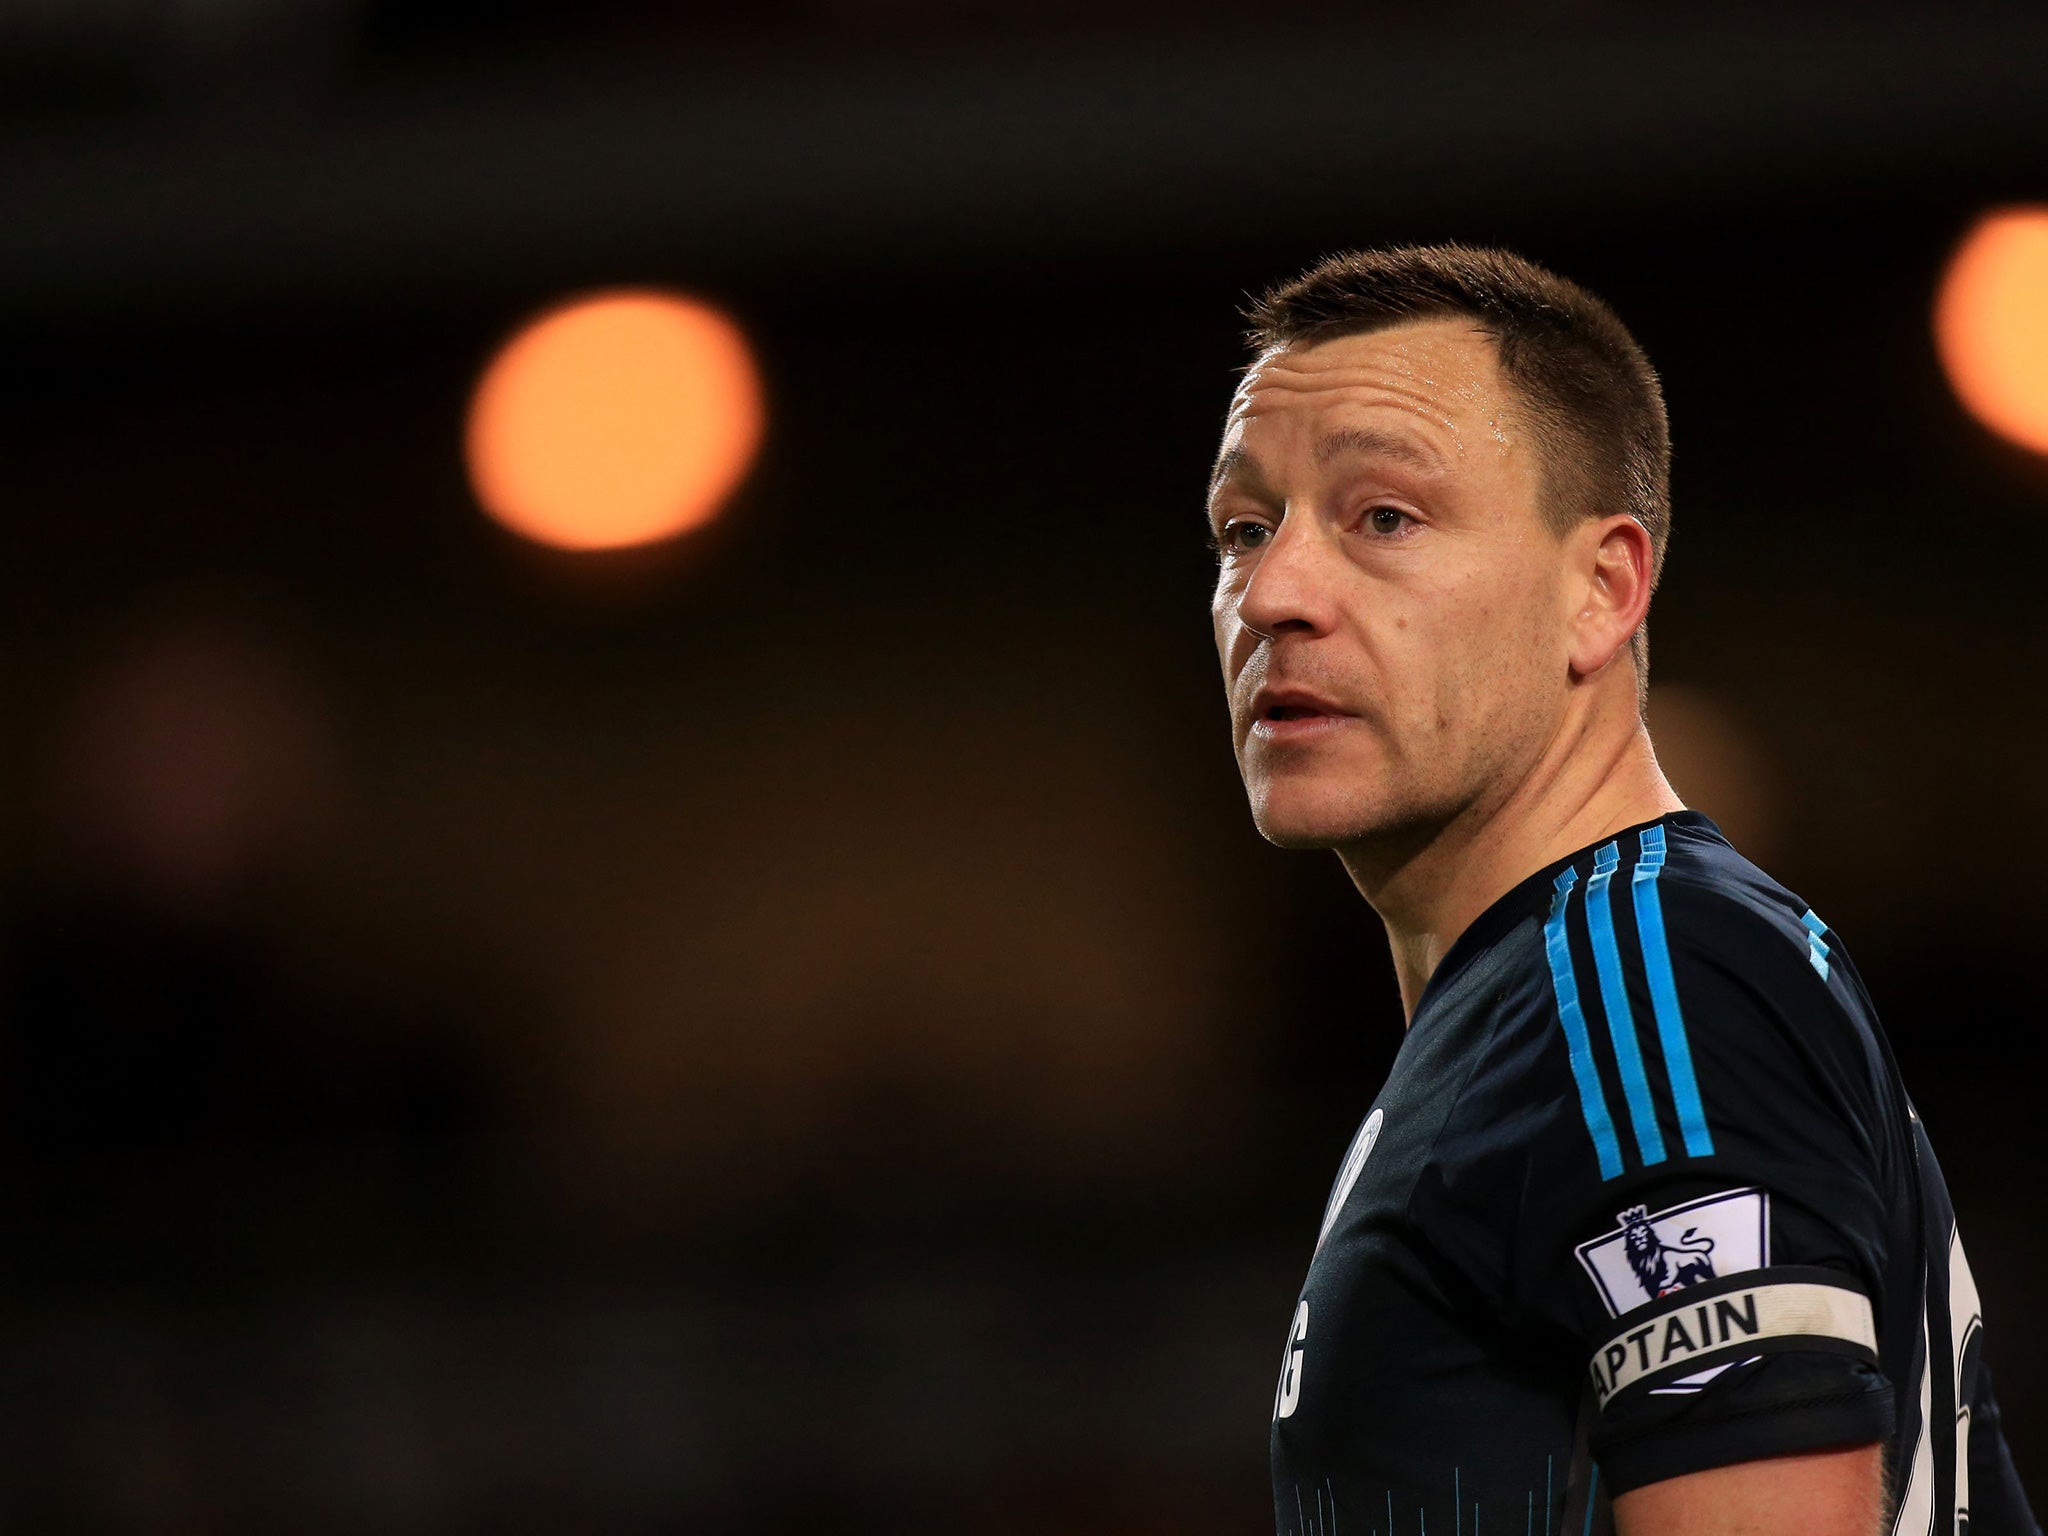 ‘Instead of going for the jugular, you end up in there waiting and waiting,’ said captain John Terry